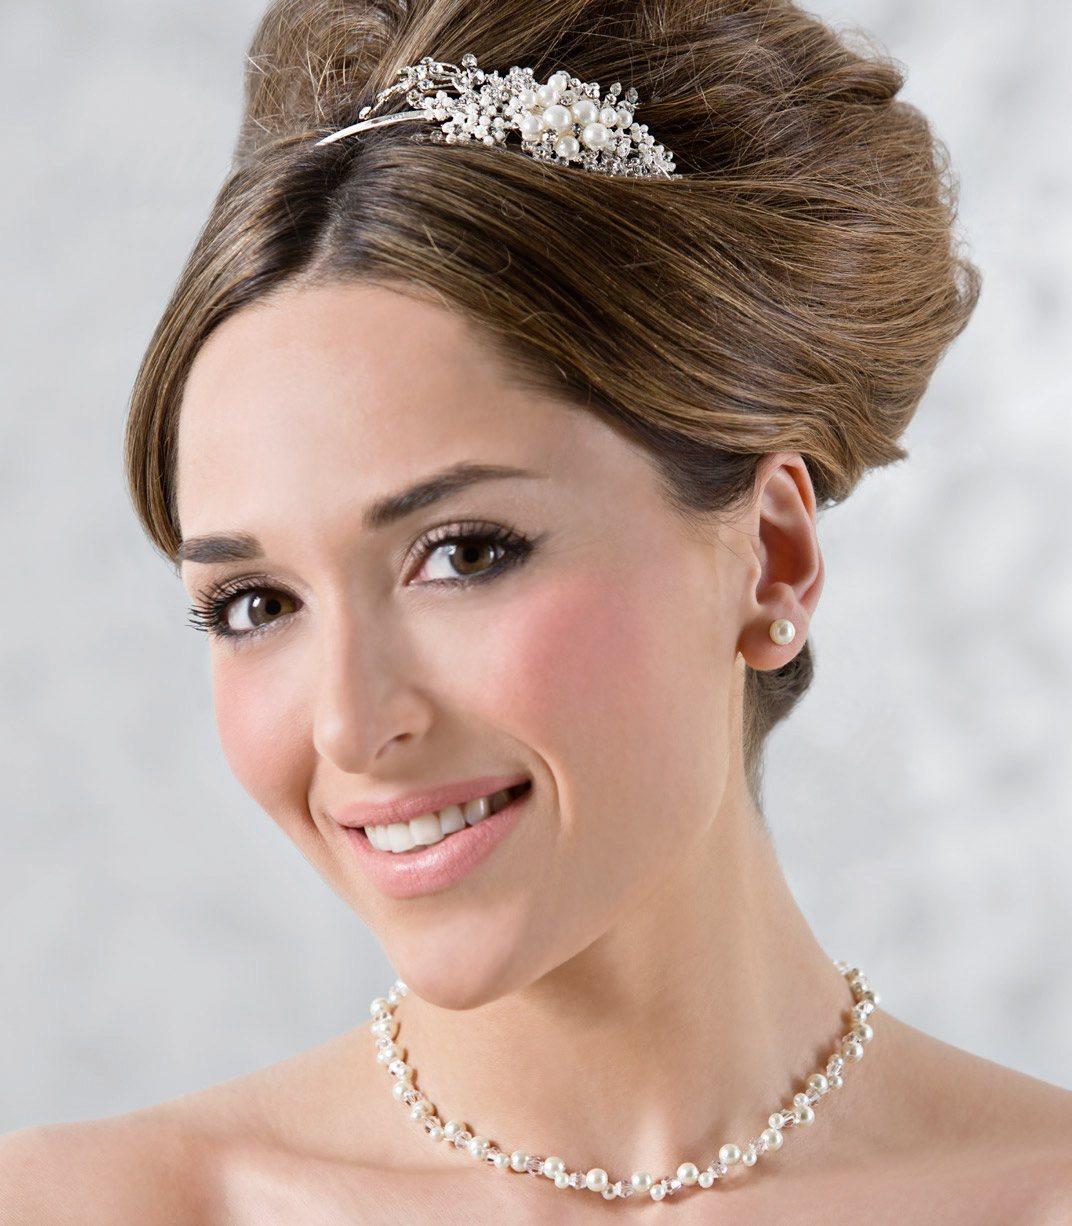 Bridal juck guide: The most beautiful accessories for the wedding